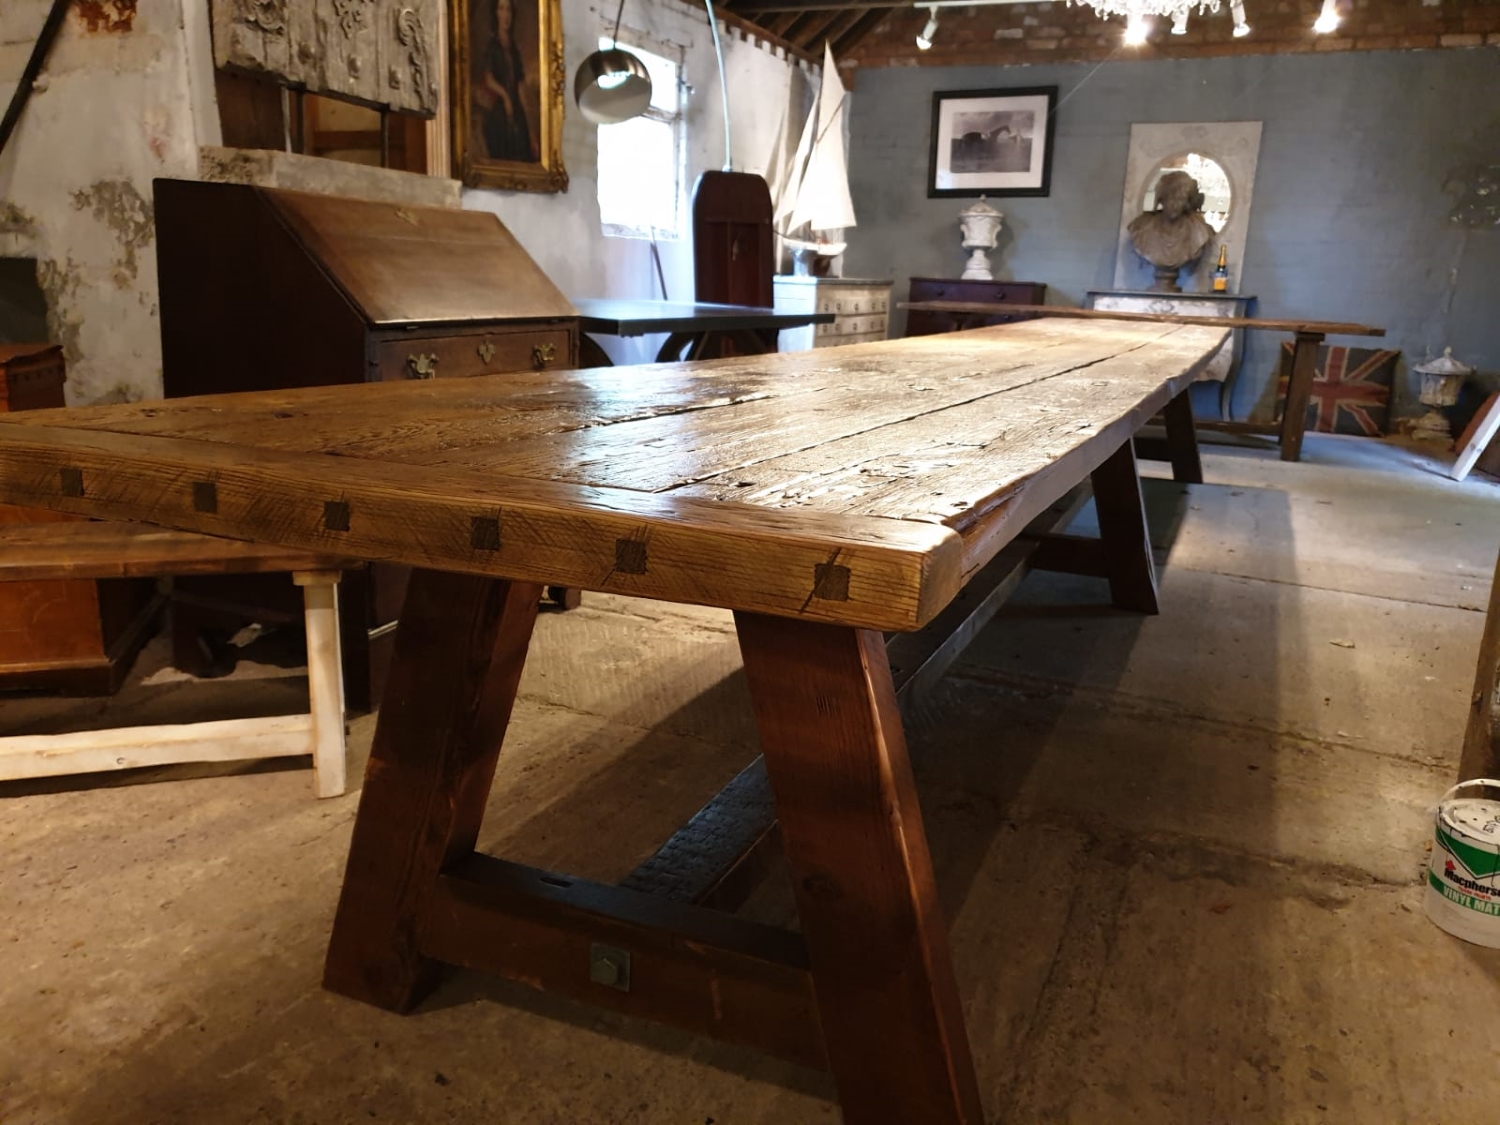 19th Century Period Dining Table 6m Long, Seats 24 with Comfort